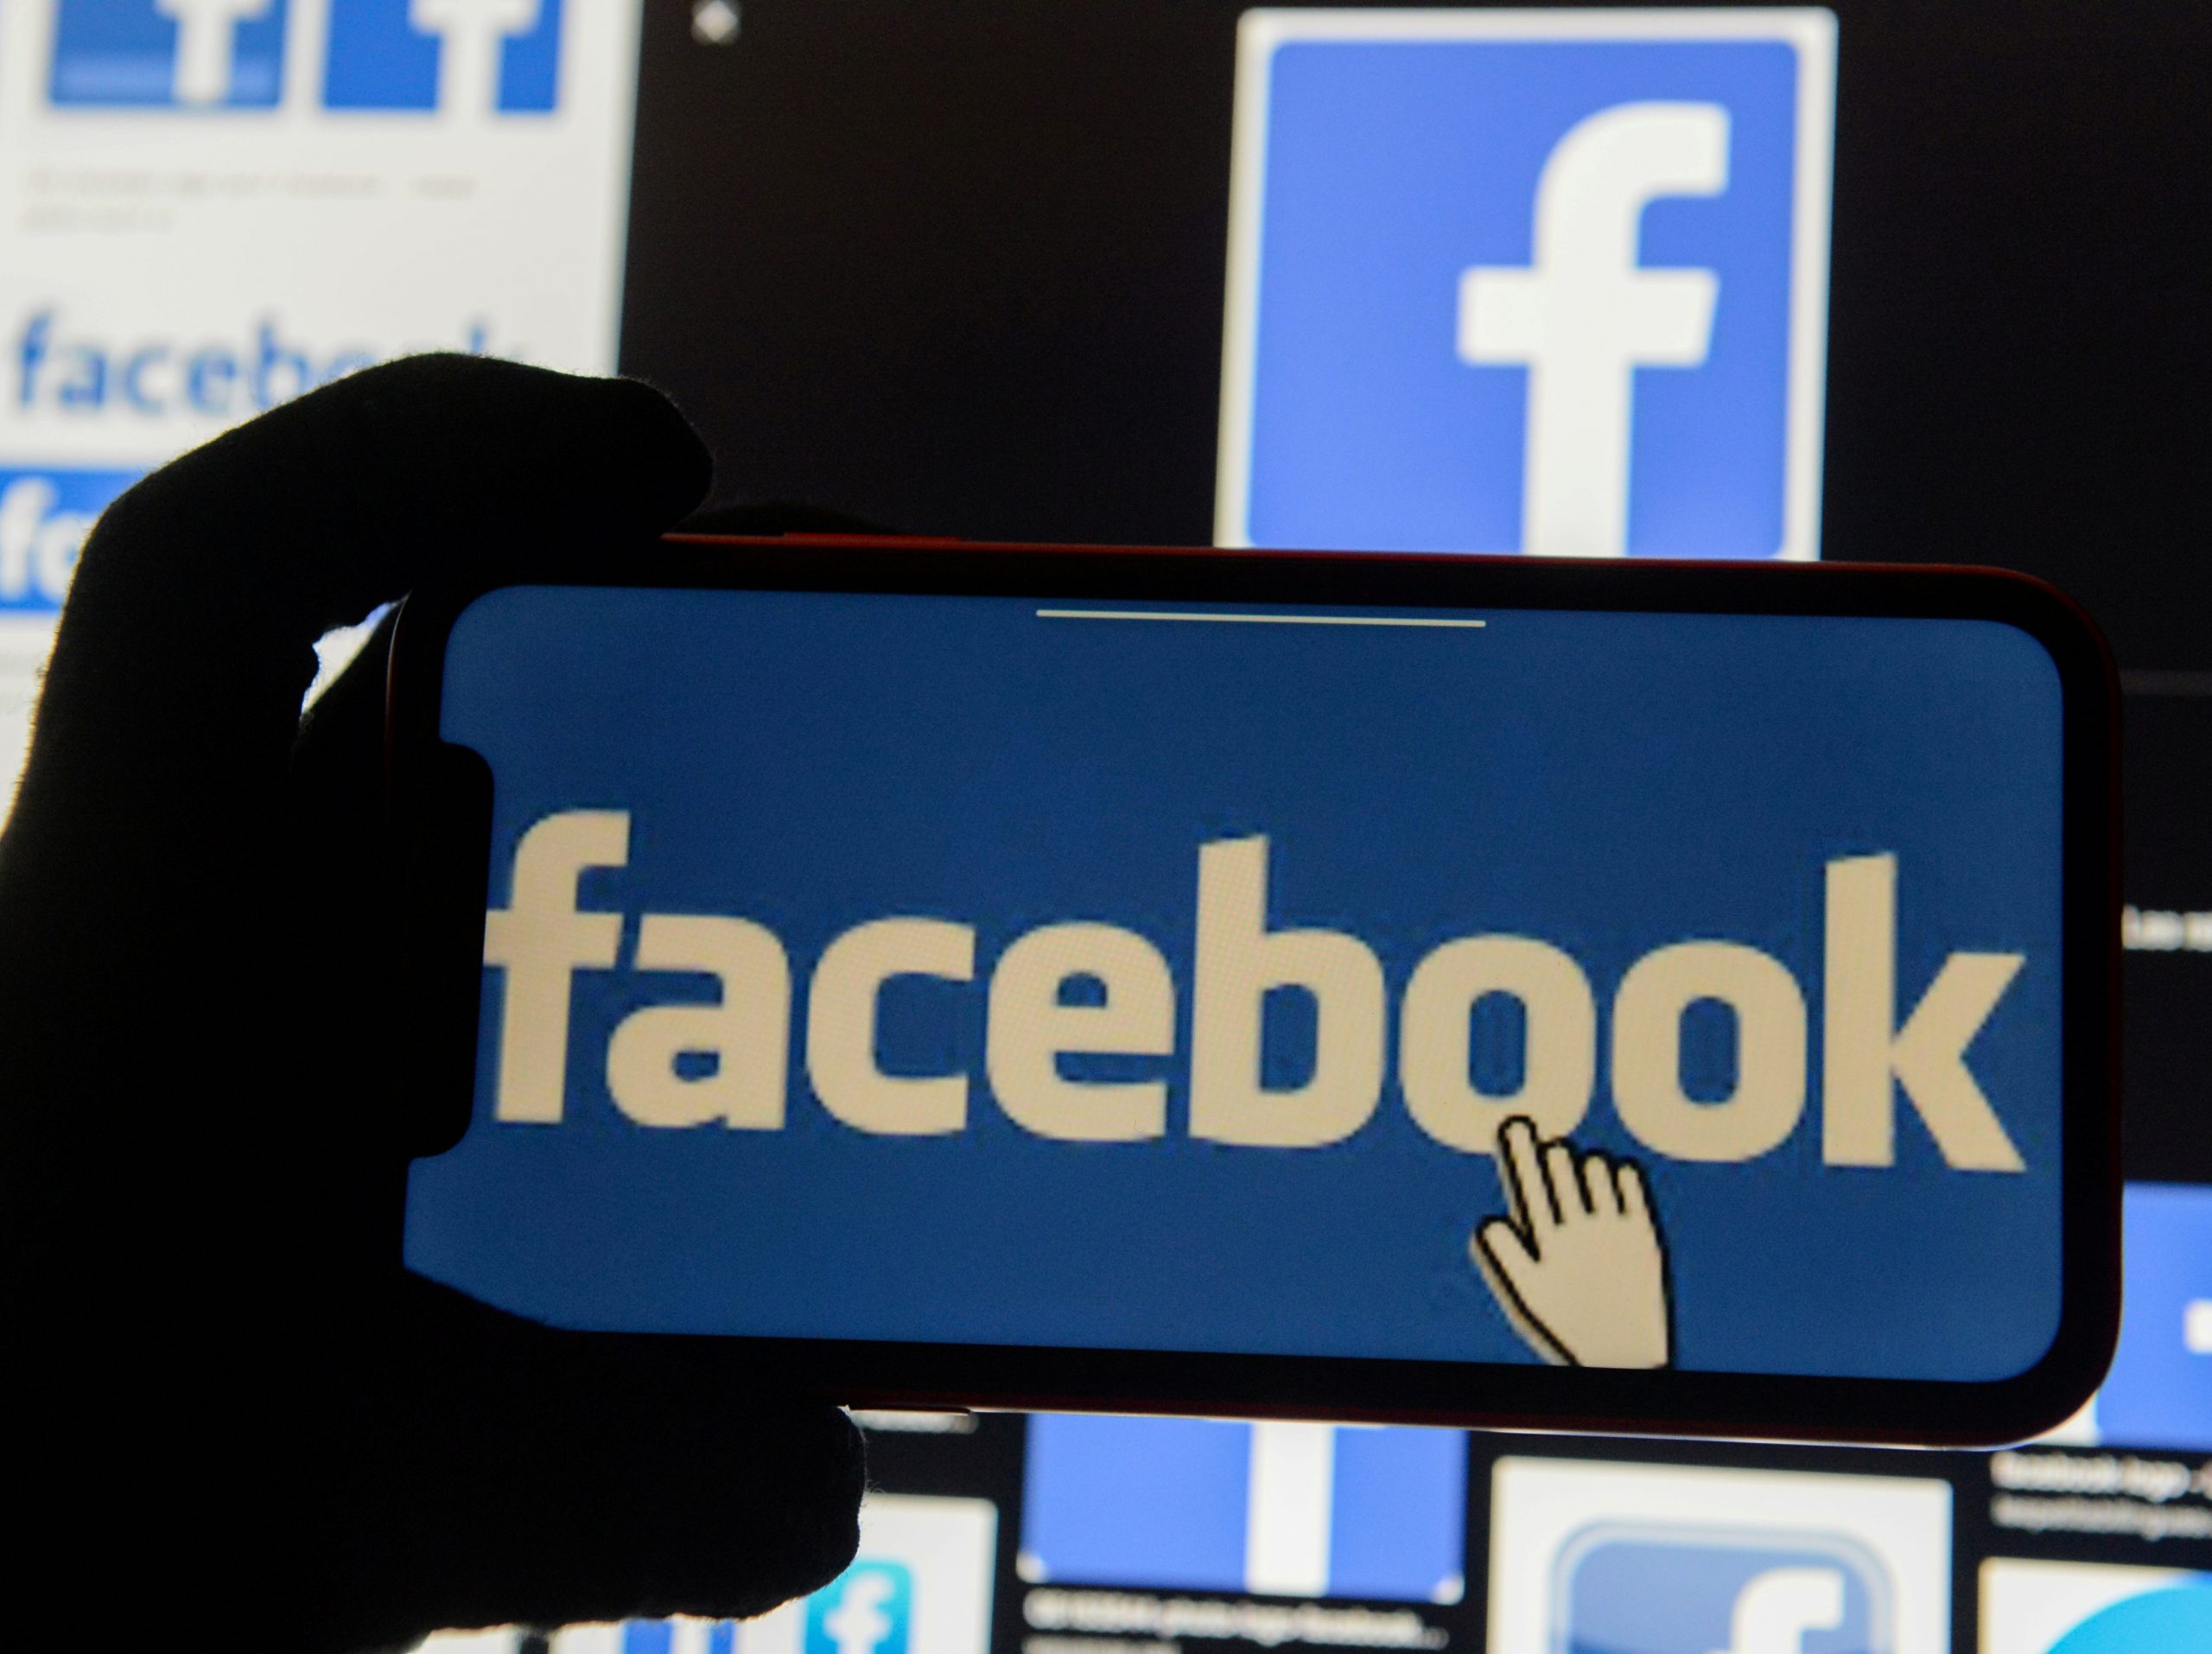 FILE PHOTO: The Facebook logo is displayed on a mobile phone in this picture illustration taken December 2, 2019. REUTERS/Johanna Geron/Illustration/File Photo